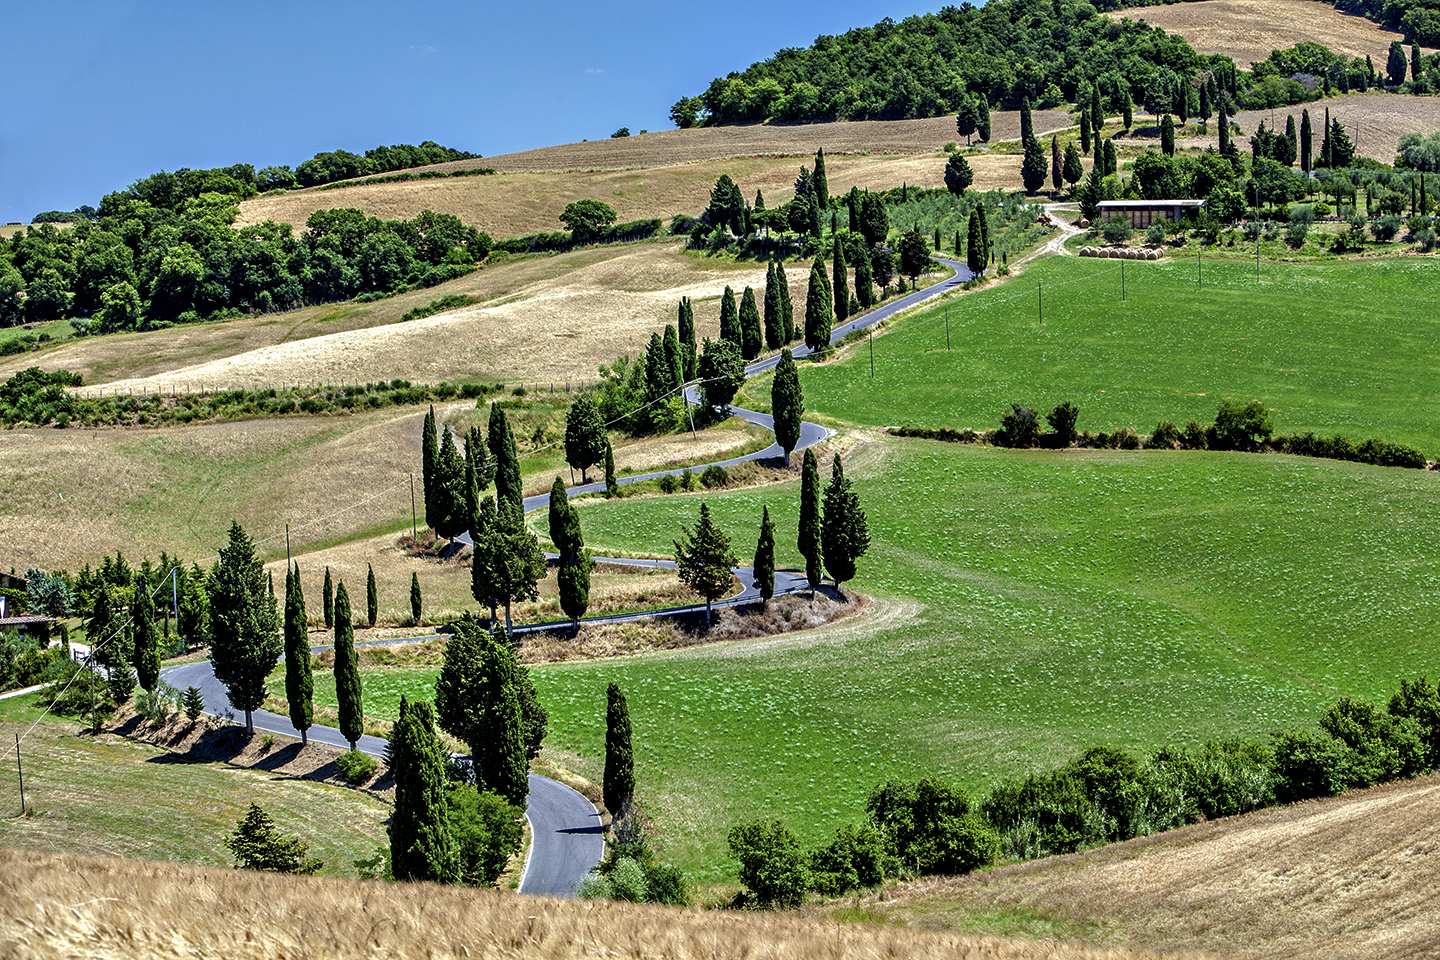 Winding through the Tuscan Hills